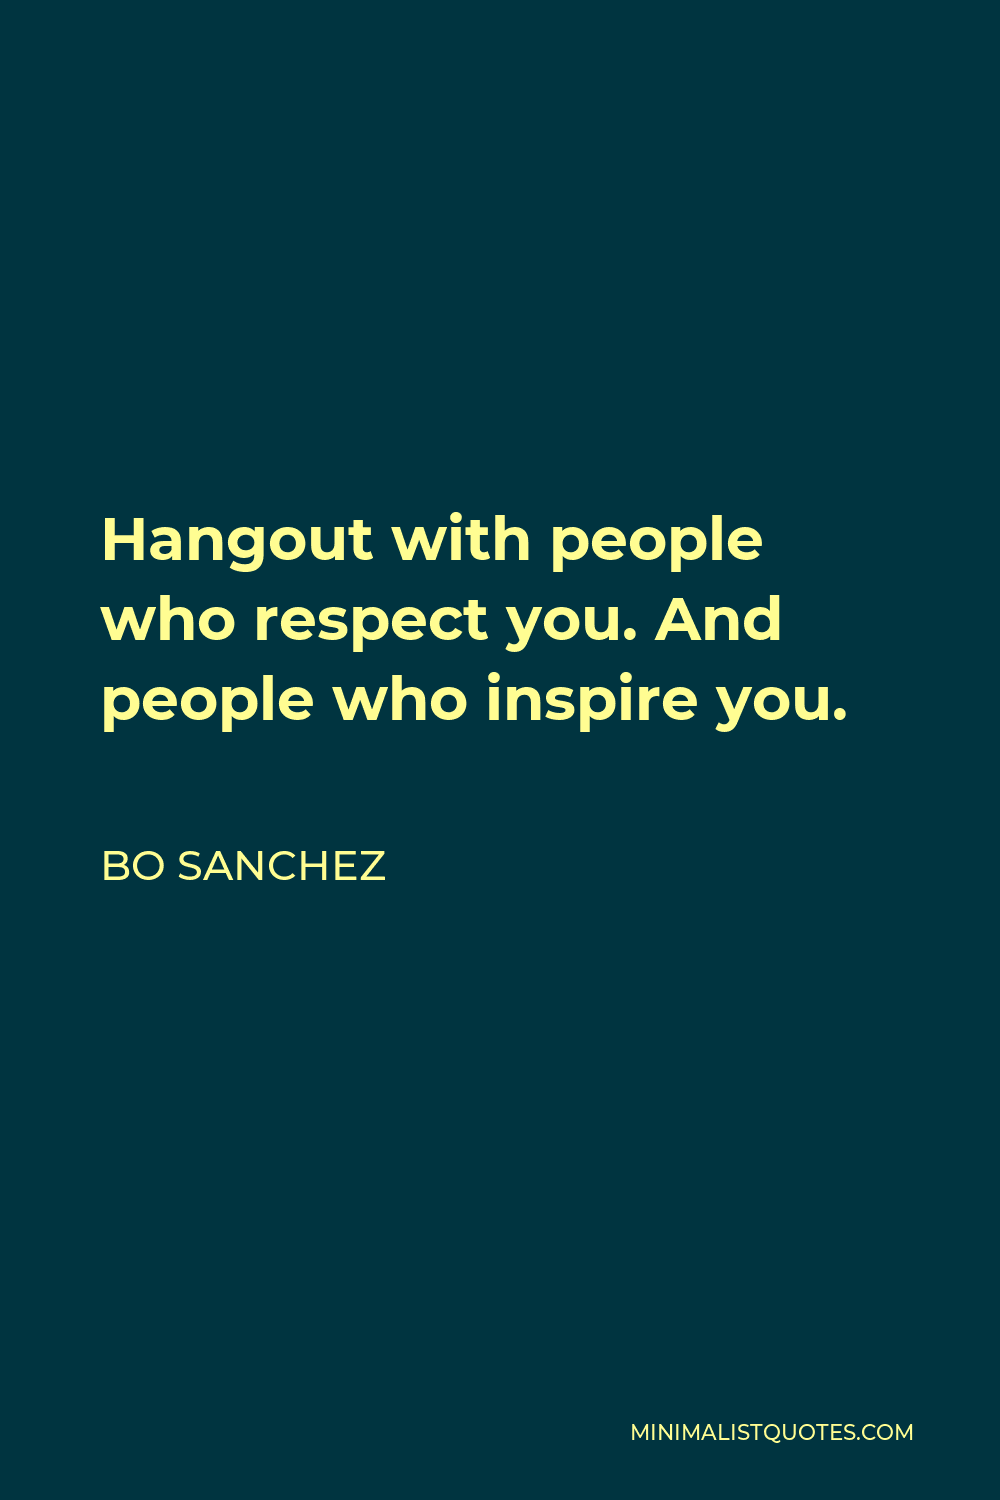 Bo Sanchez Quote - Hangout with people who respect you. And people who inspire you.